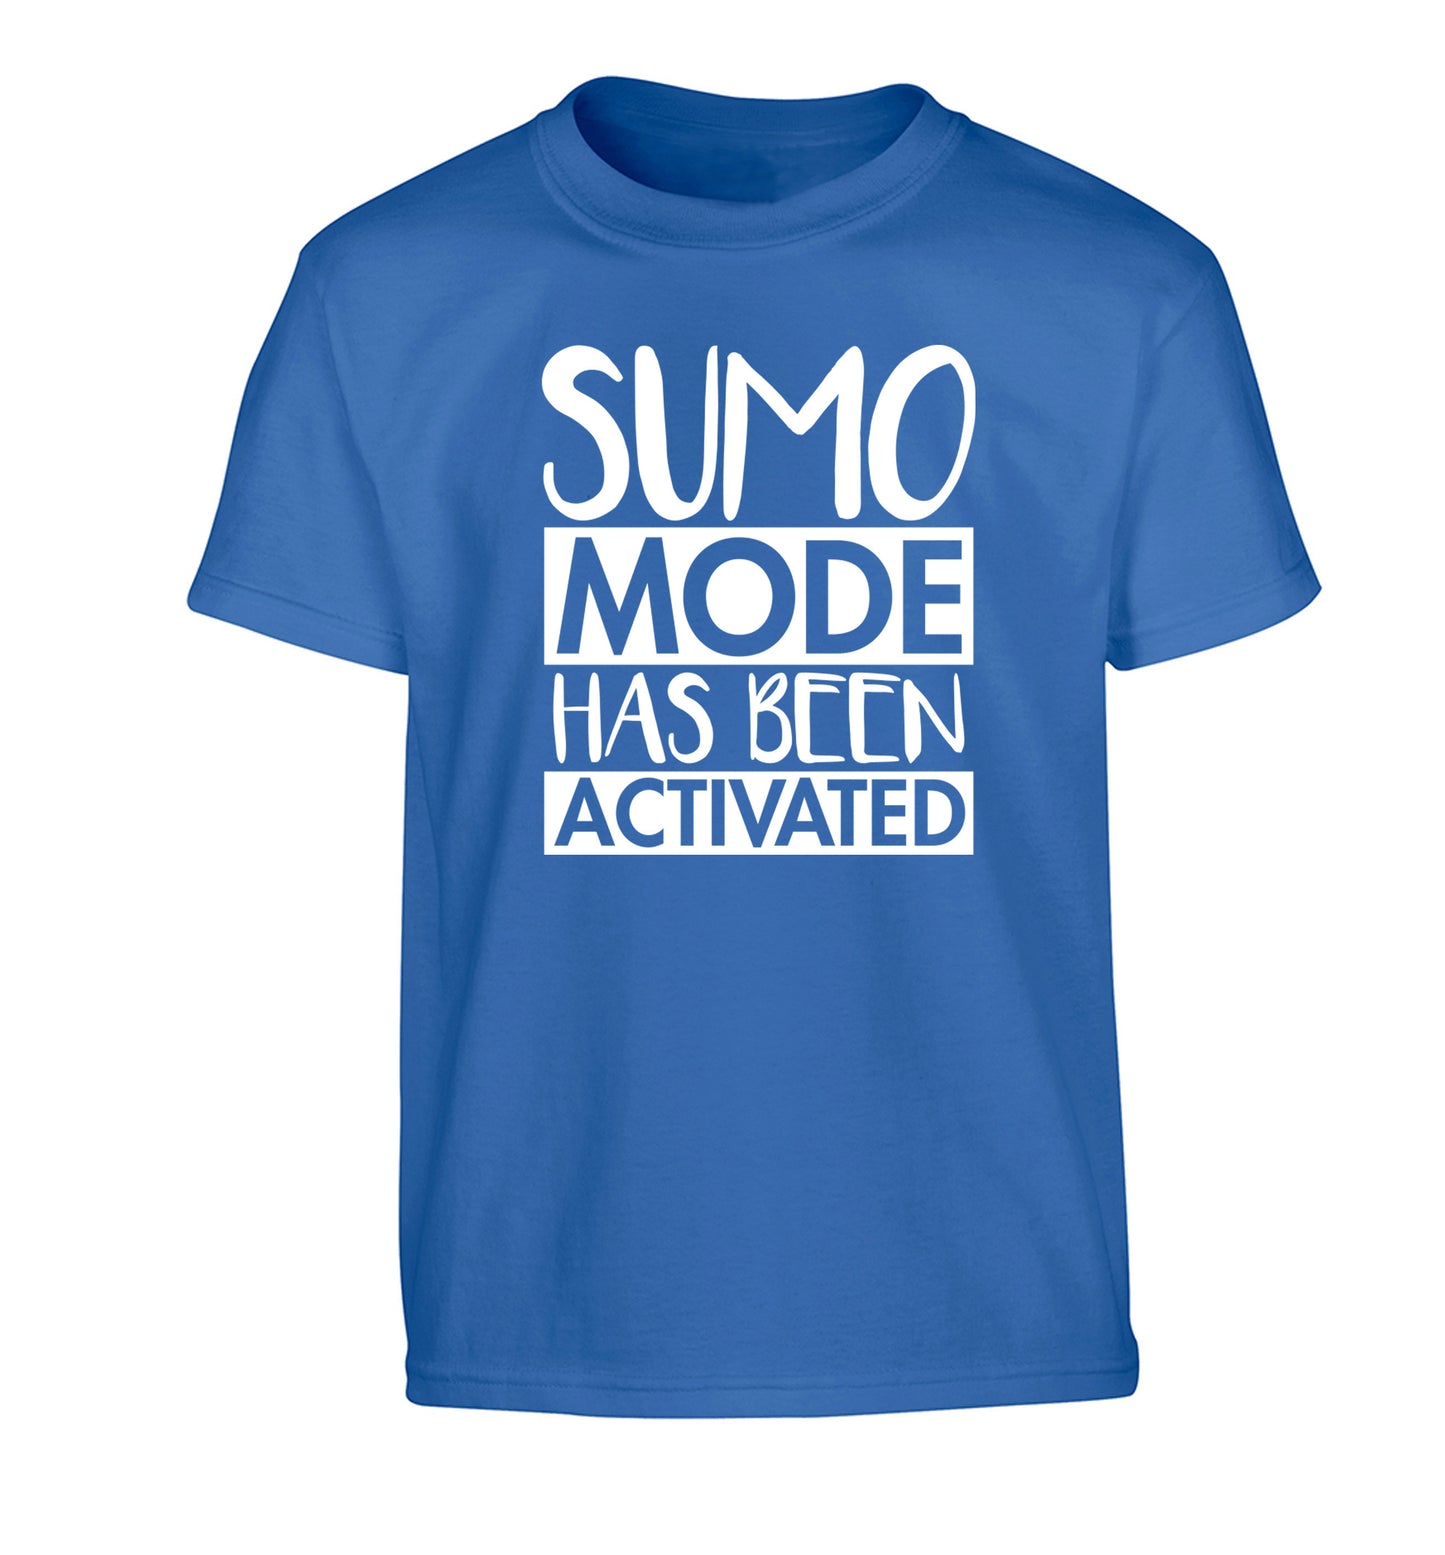 Sumo mode activated Children's blue Tshirt 12-14 Years